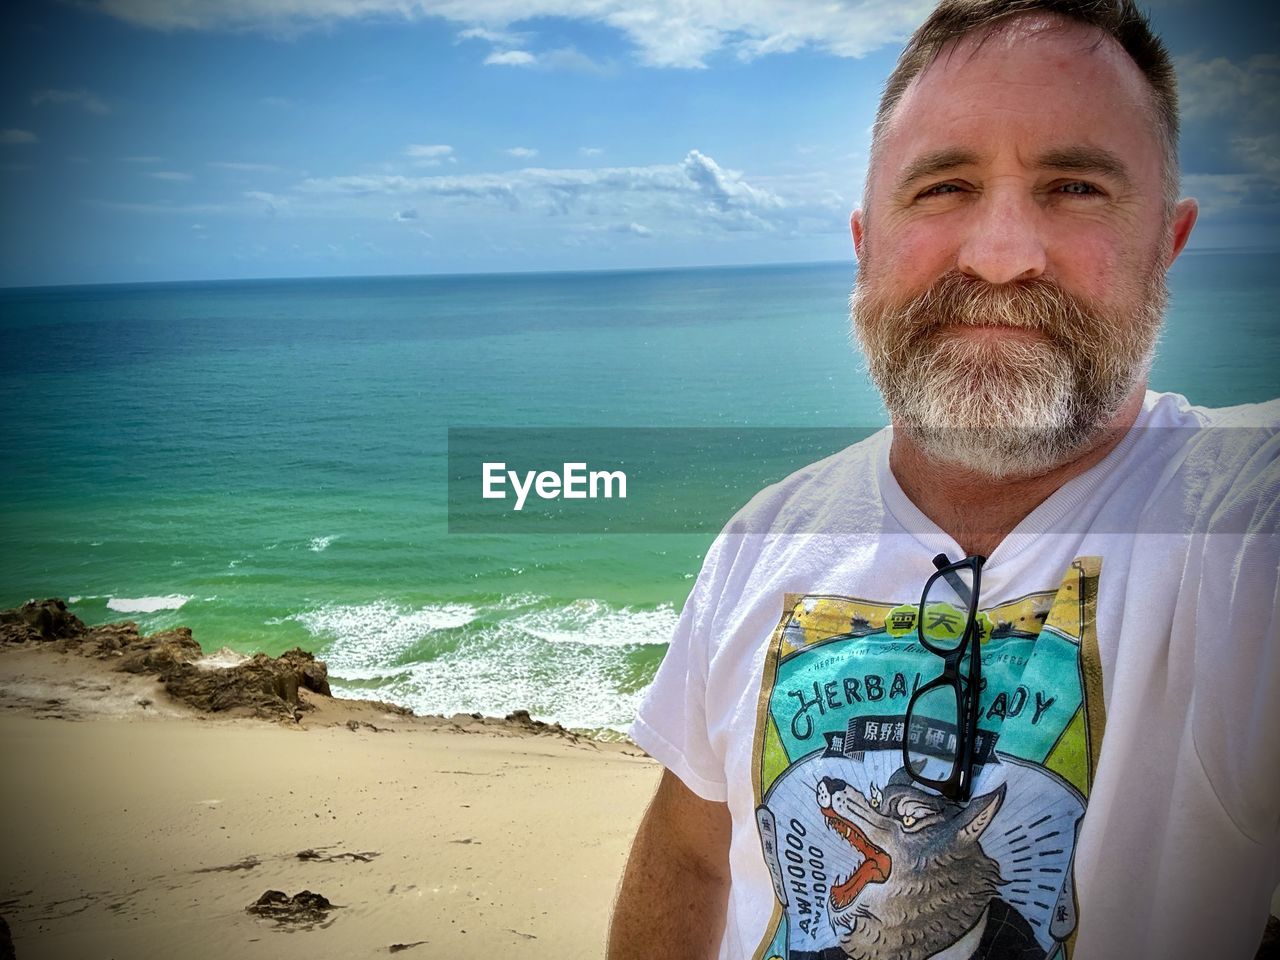 sea, water, beach, one person, land, portrait, adult, sky, vacation, men, beard, facial hair, nature, looking at camera, mature adult, horizon over water, ocean, front view, horizon, smiling, holiday, leisure activity, person, trip, cloud, blue, day, beauty in nature, casual clothing, scenics - nature, lifestyles, emotion, happiness, clothing, sand, outdoors, human face, travel, standing, travel destinations, relaxation, coast, waist up, sunlight, headshot